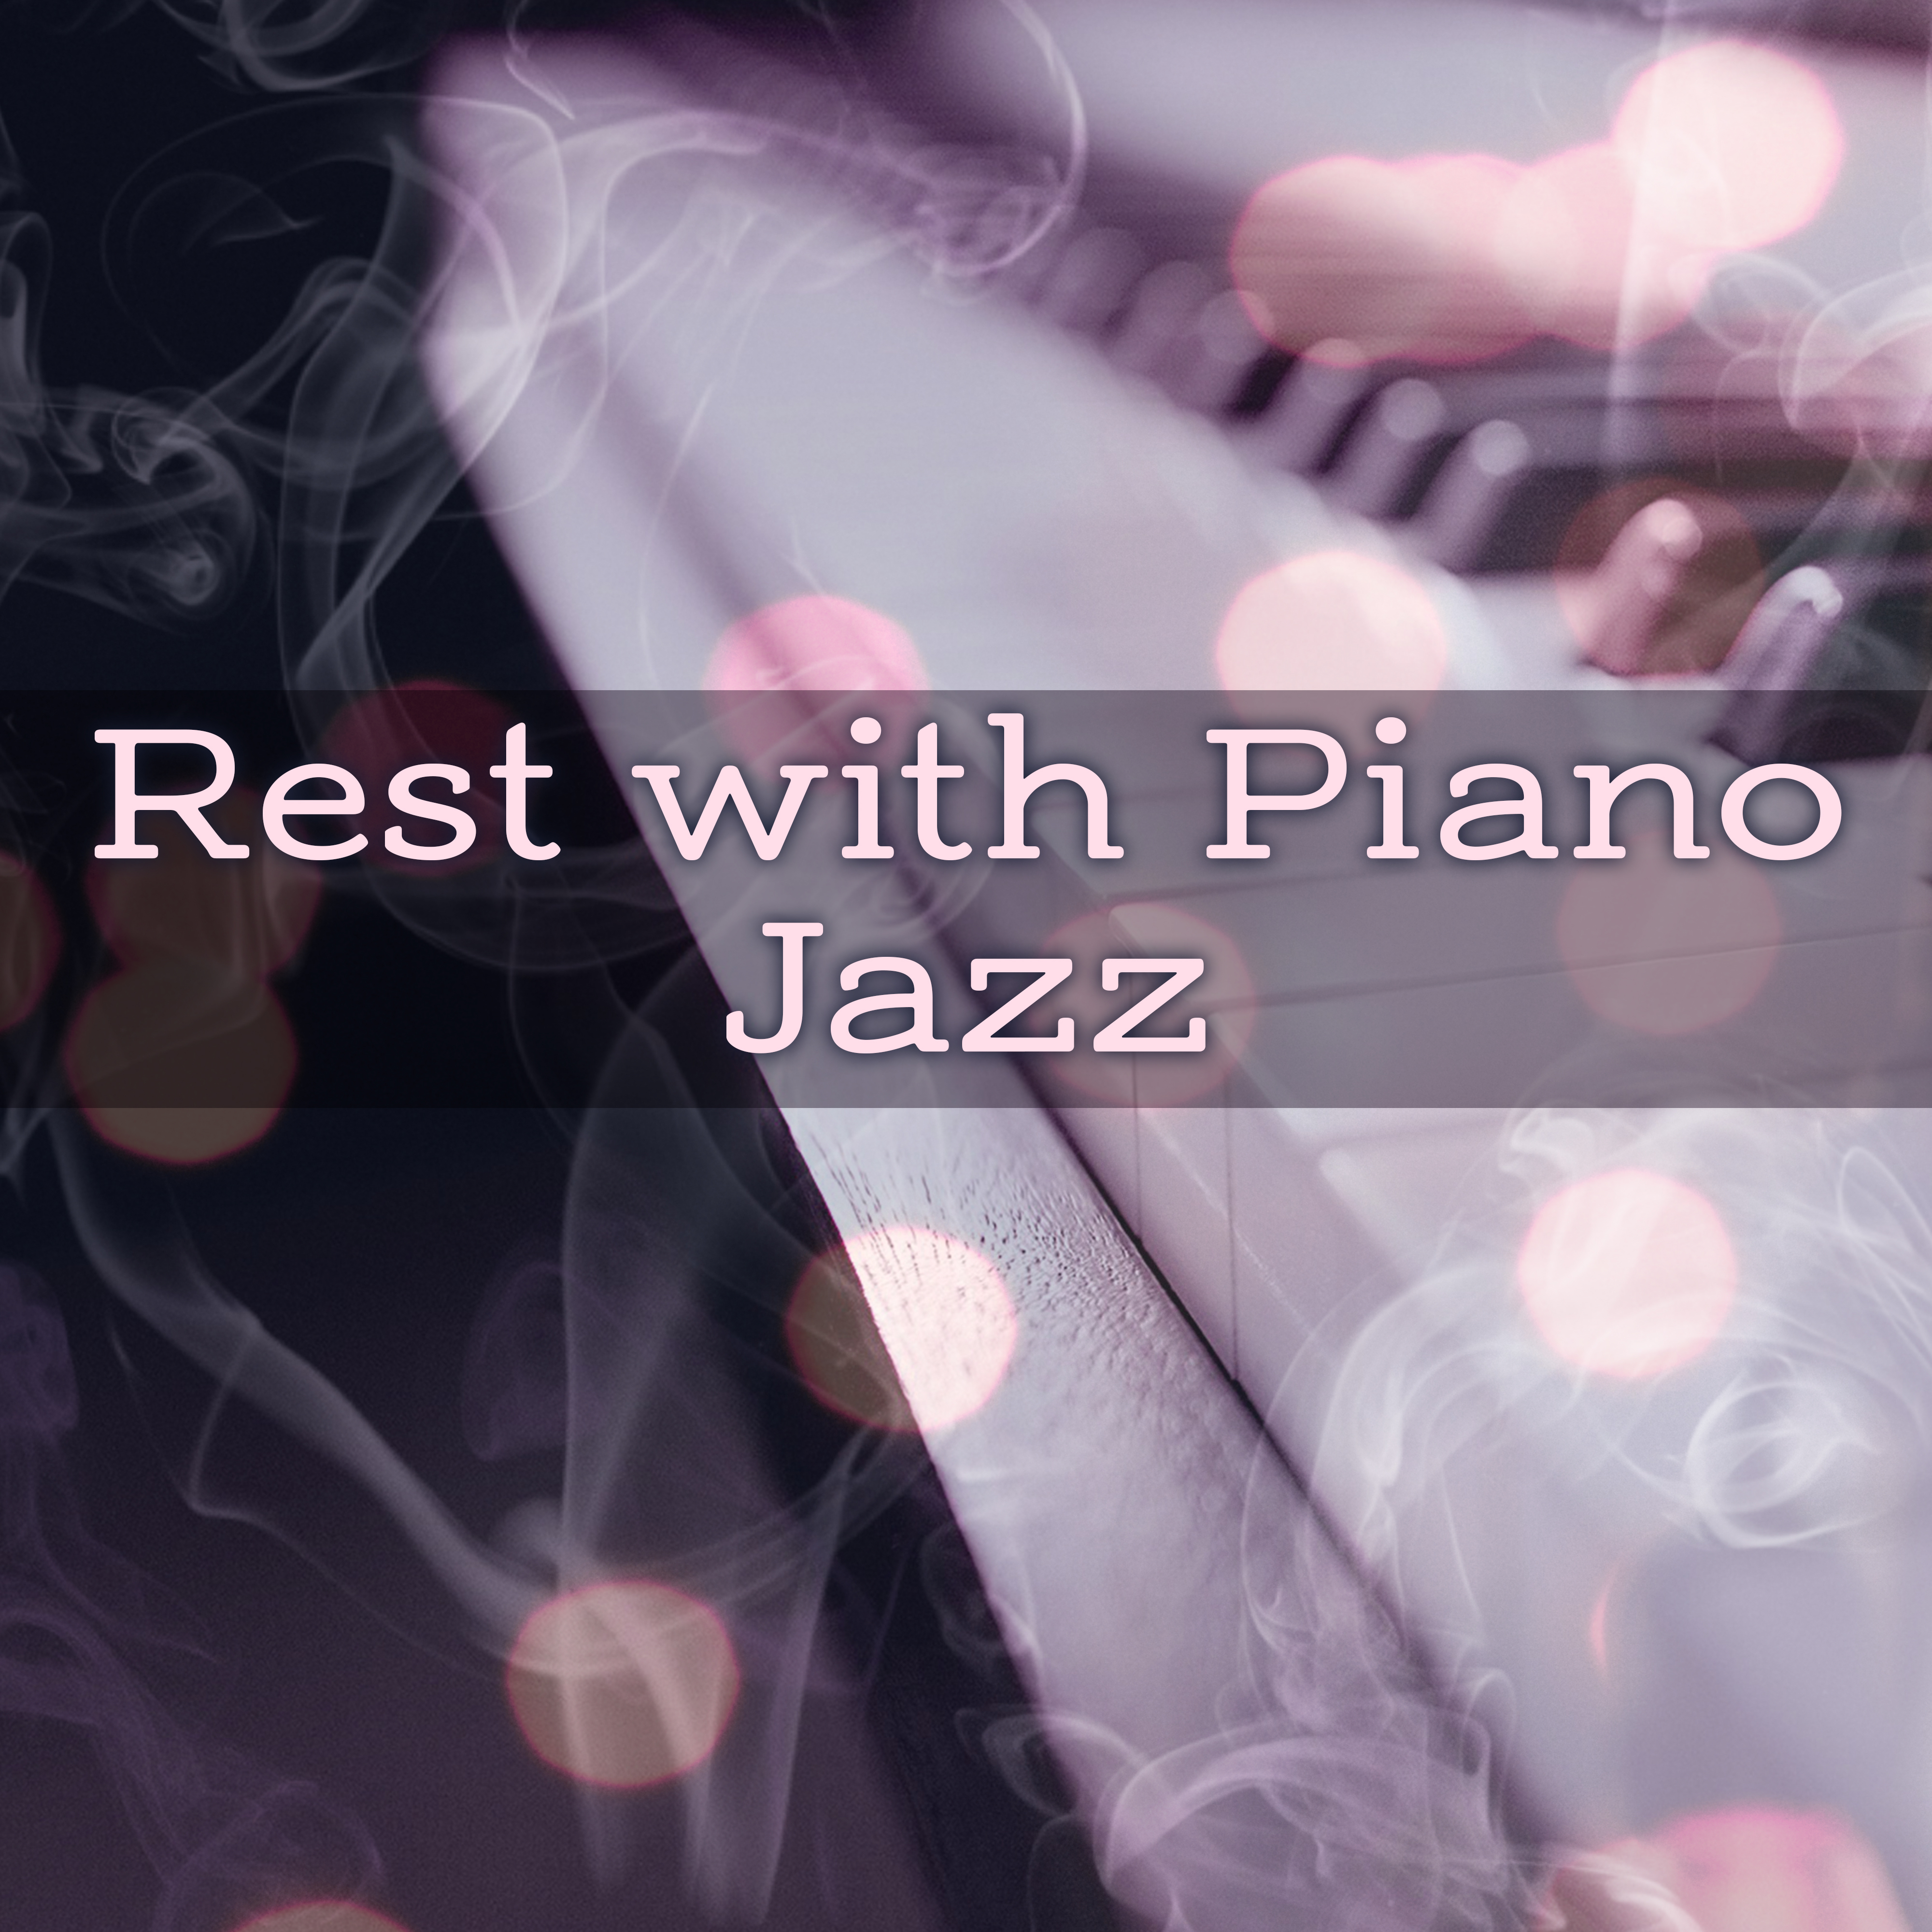 Rest with Piano Jazz – Calming Sounds to Relax, Easy Listening, Piano Bar, Soothing Sounds